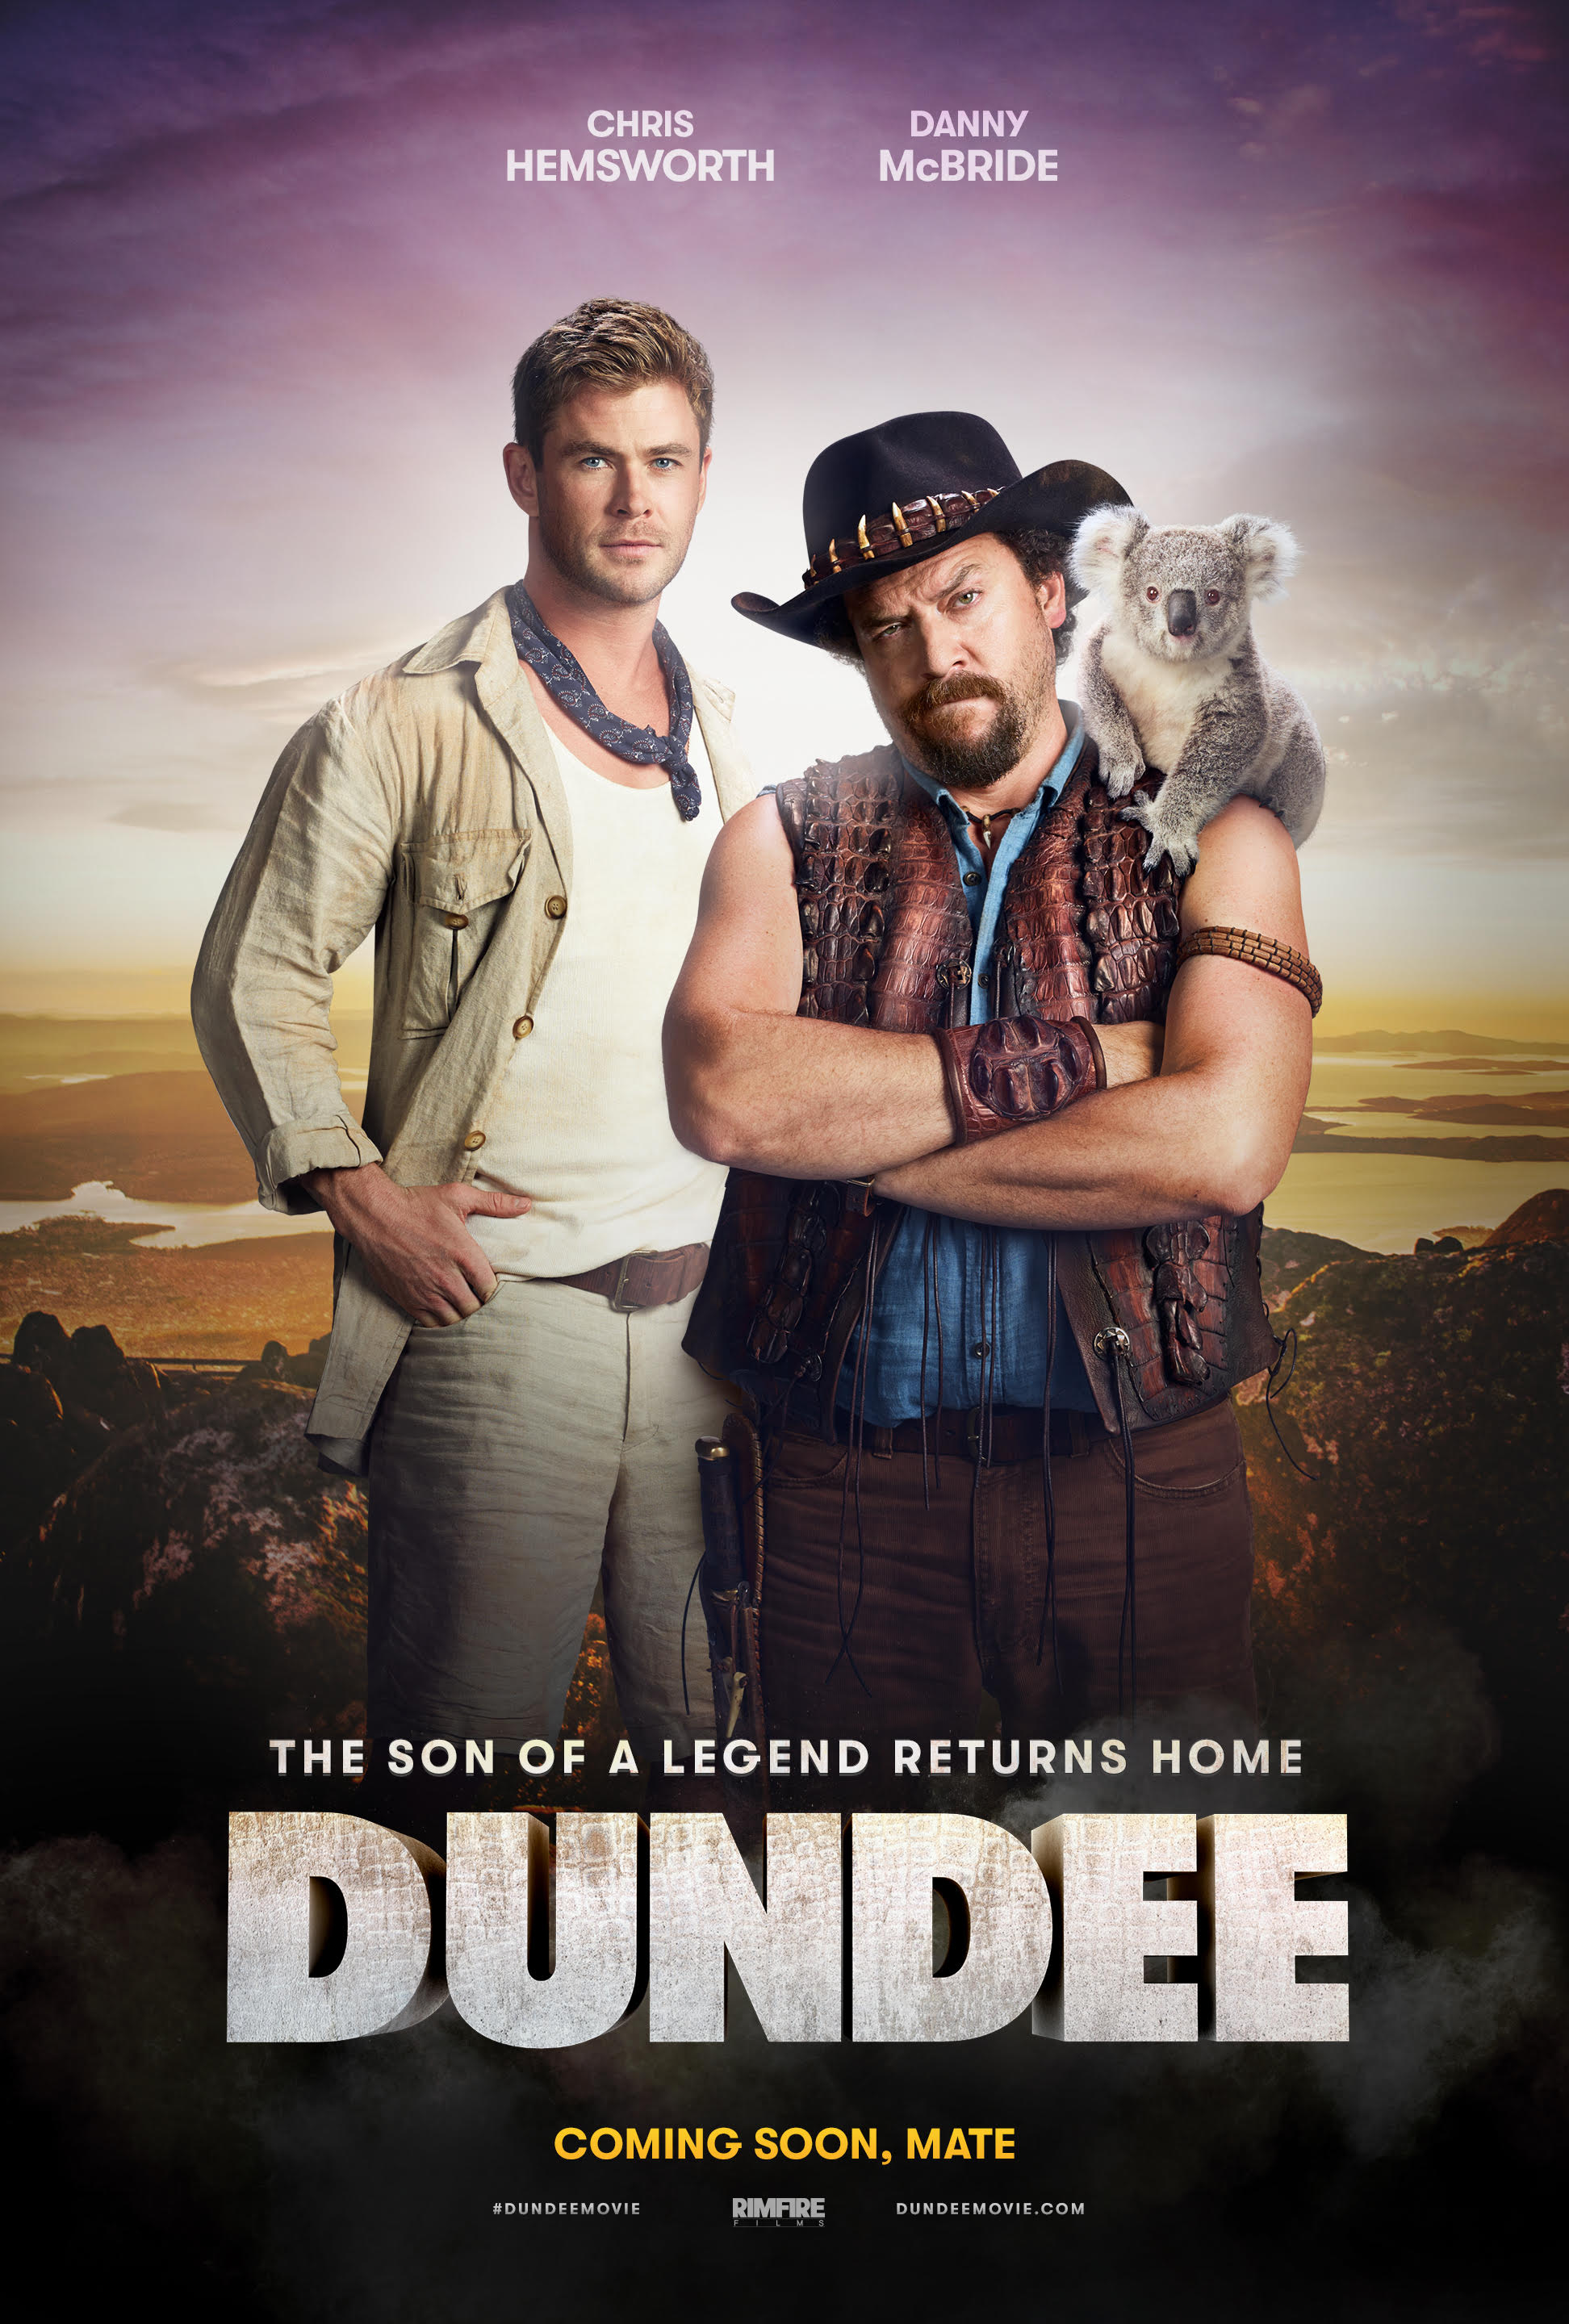 Dundee Trailer Chris Hemsworth CoStars in This Probably Fake Movie